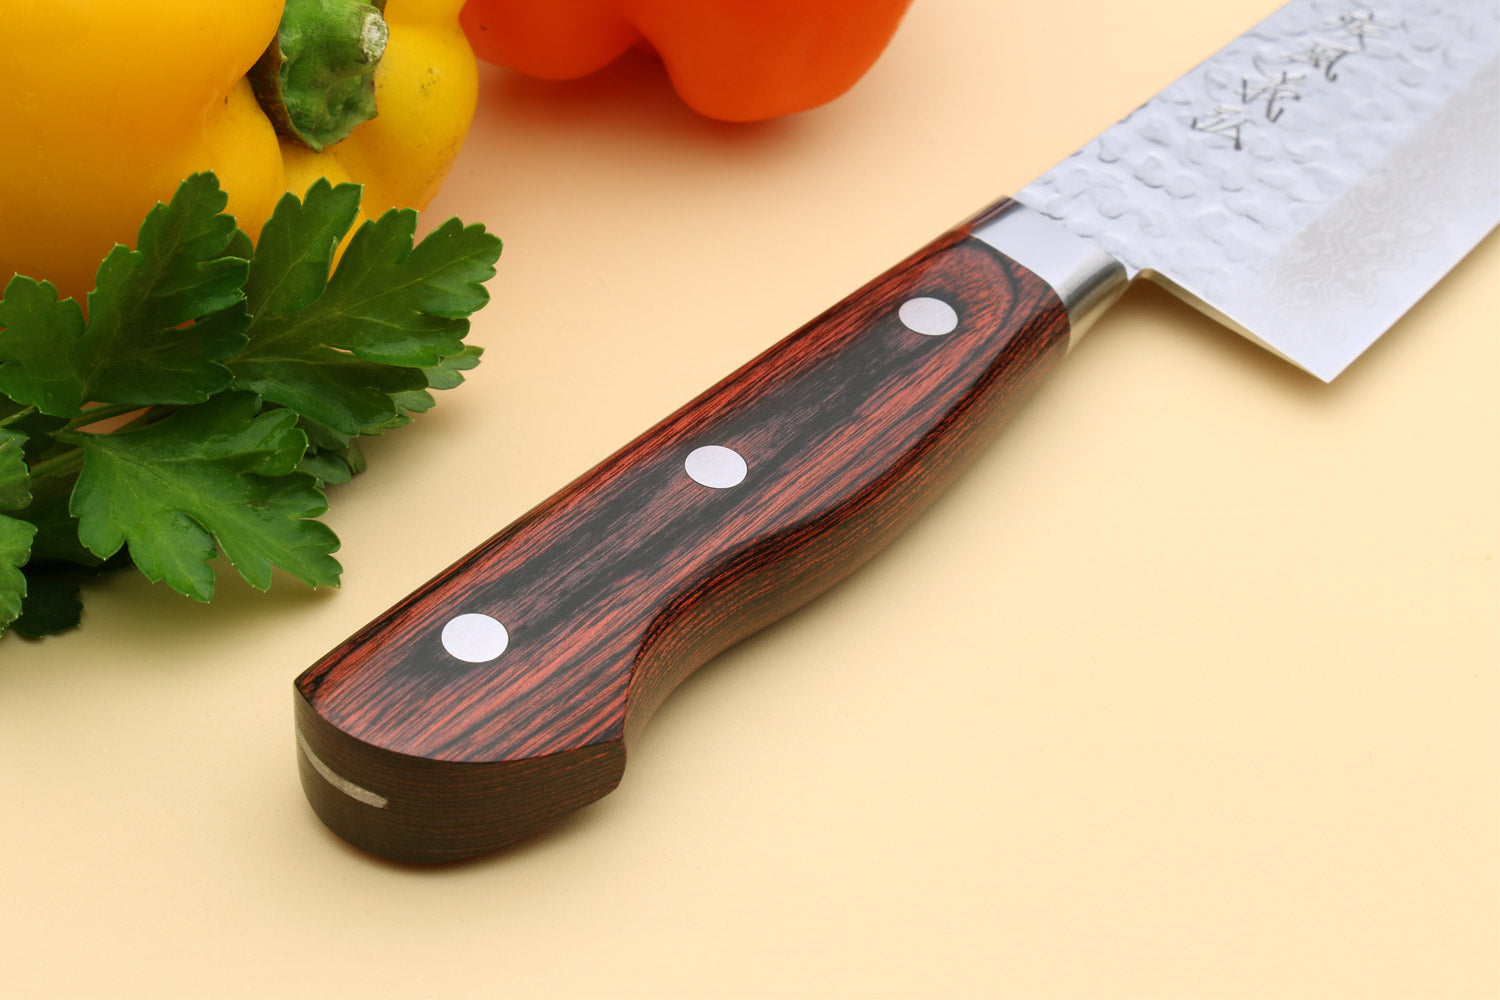 Yarenh Chef Knife Professional Japanese Damascus Stainless Steel Gyuto  Knife best Kitchen Knives